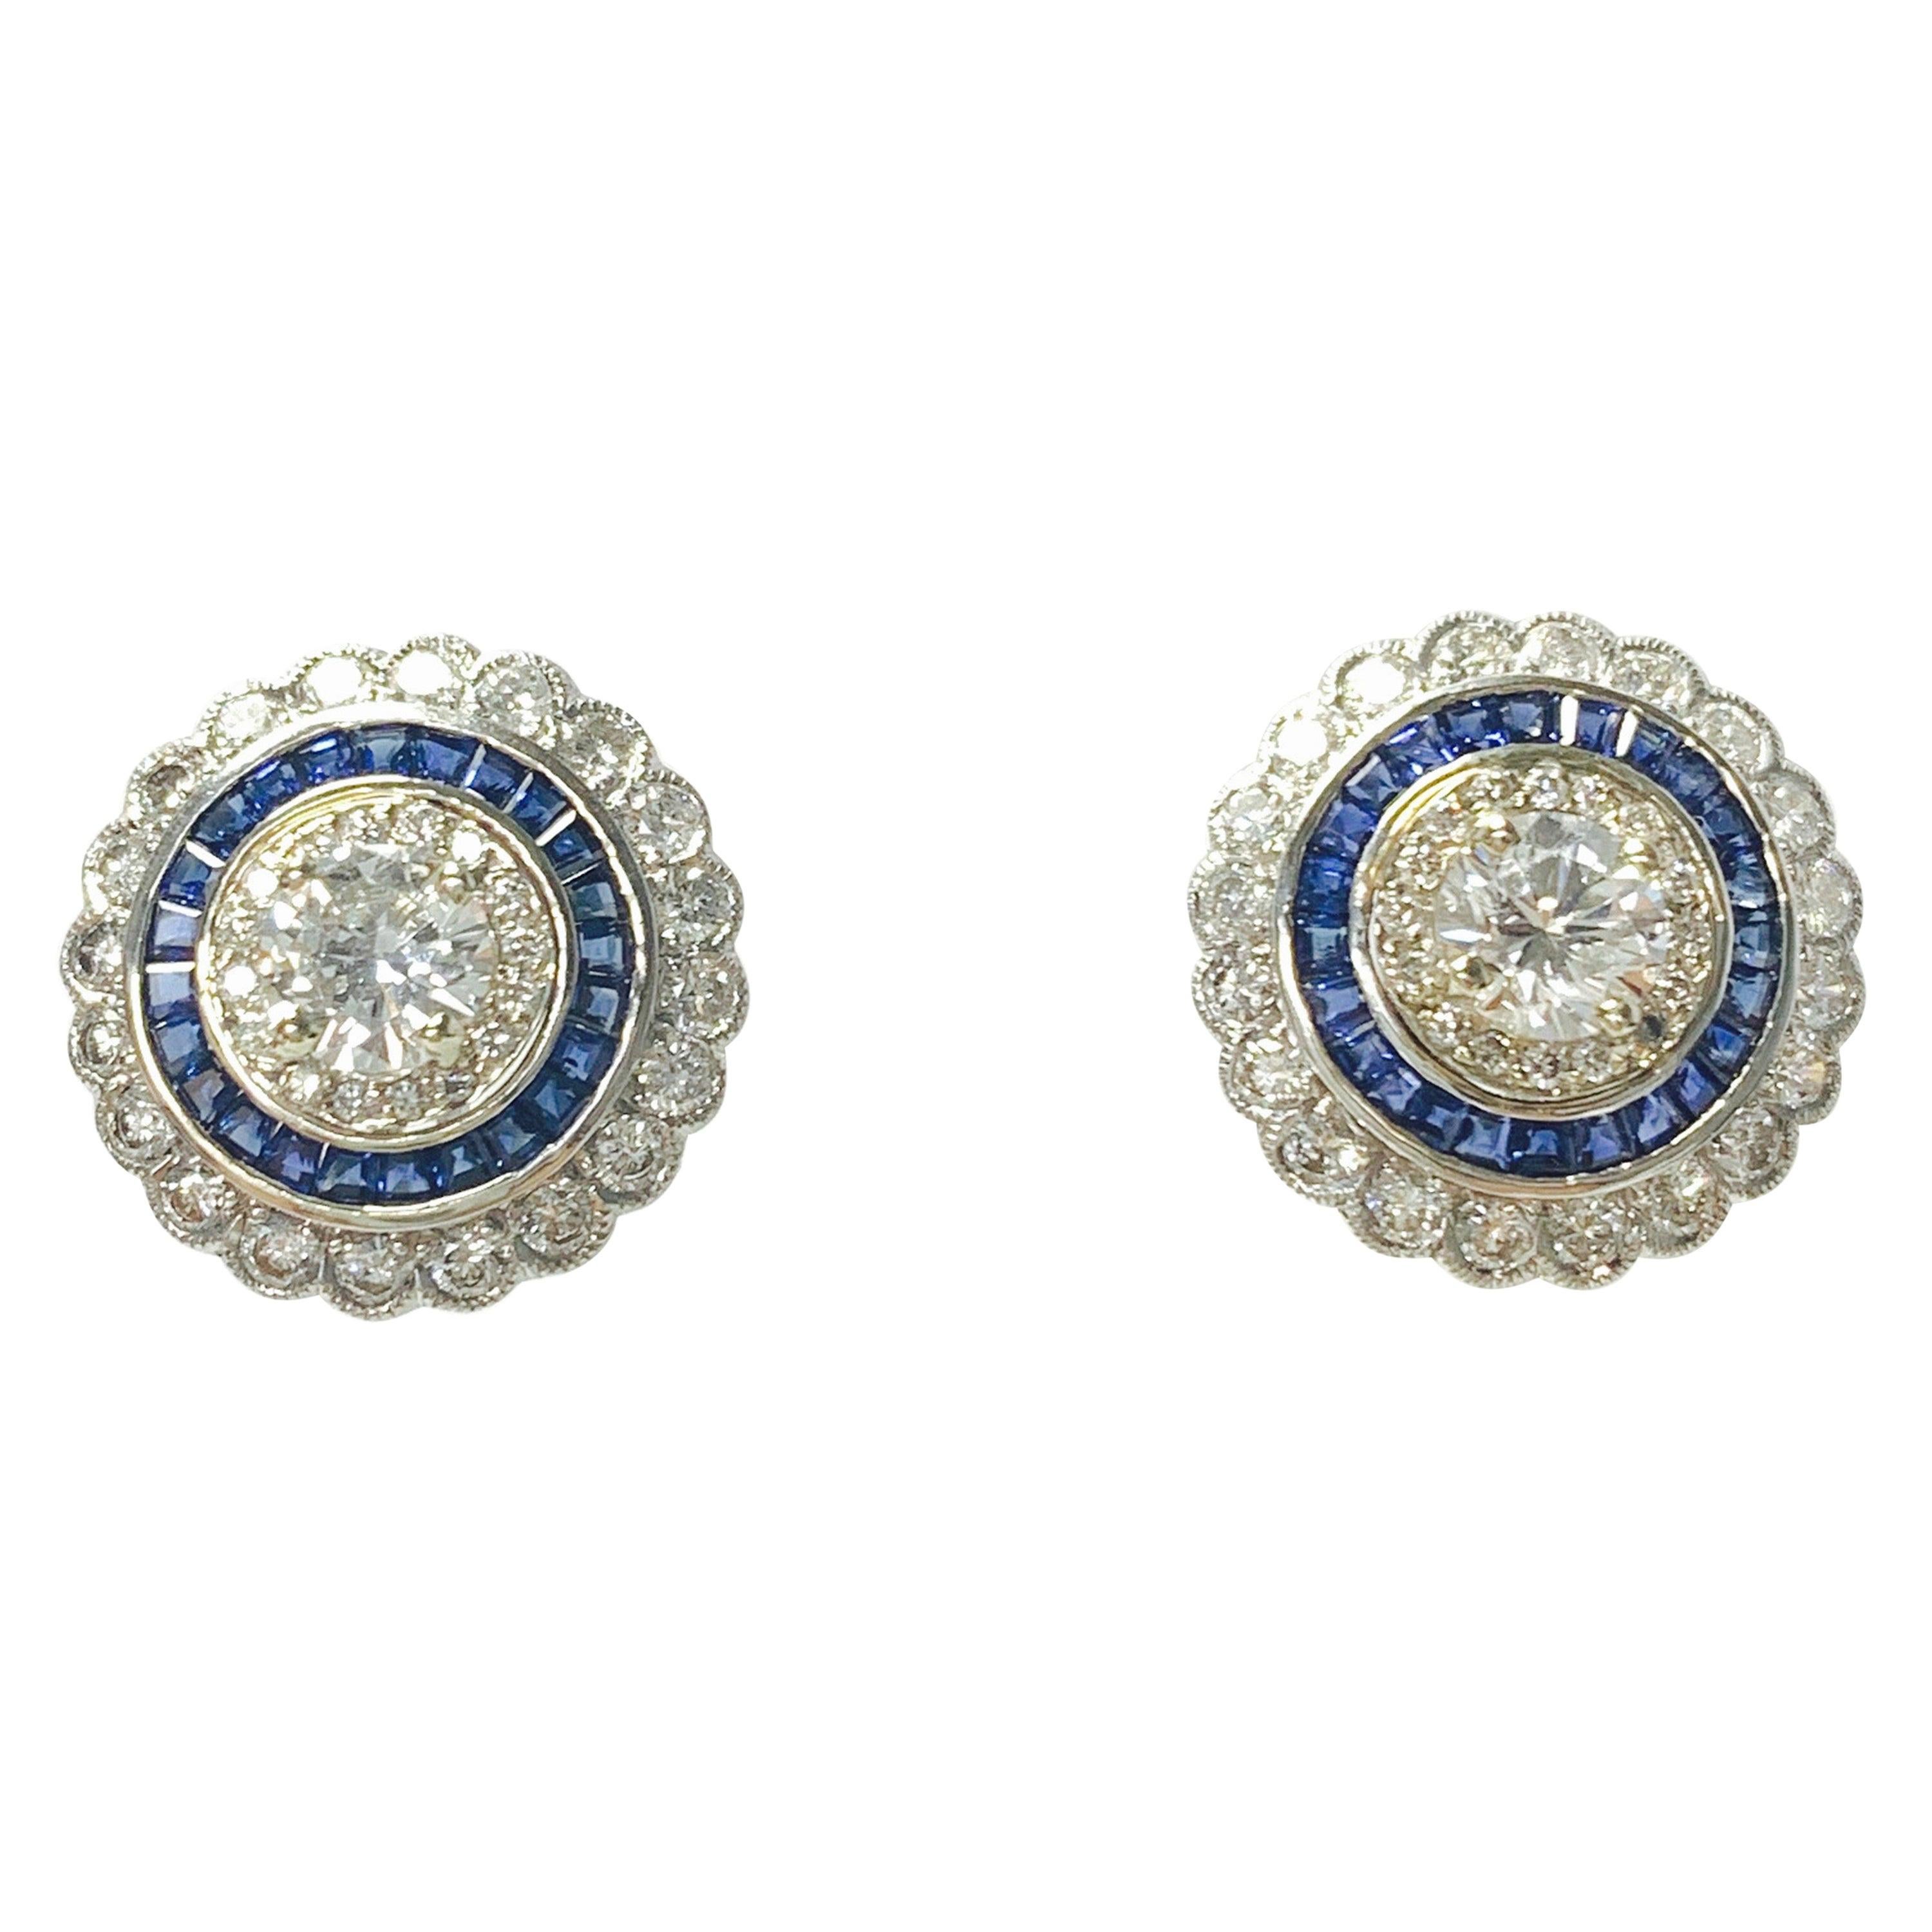 White Old European Cut Diamond and Blue Sapphire Stud Earrings in 18 Karat Gold For Sale